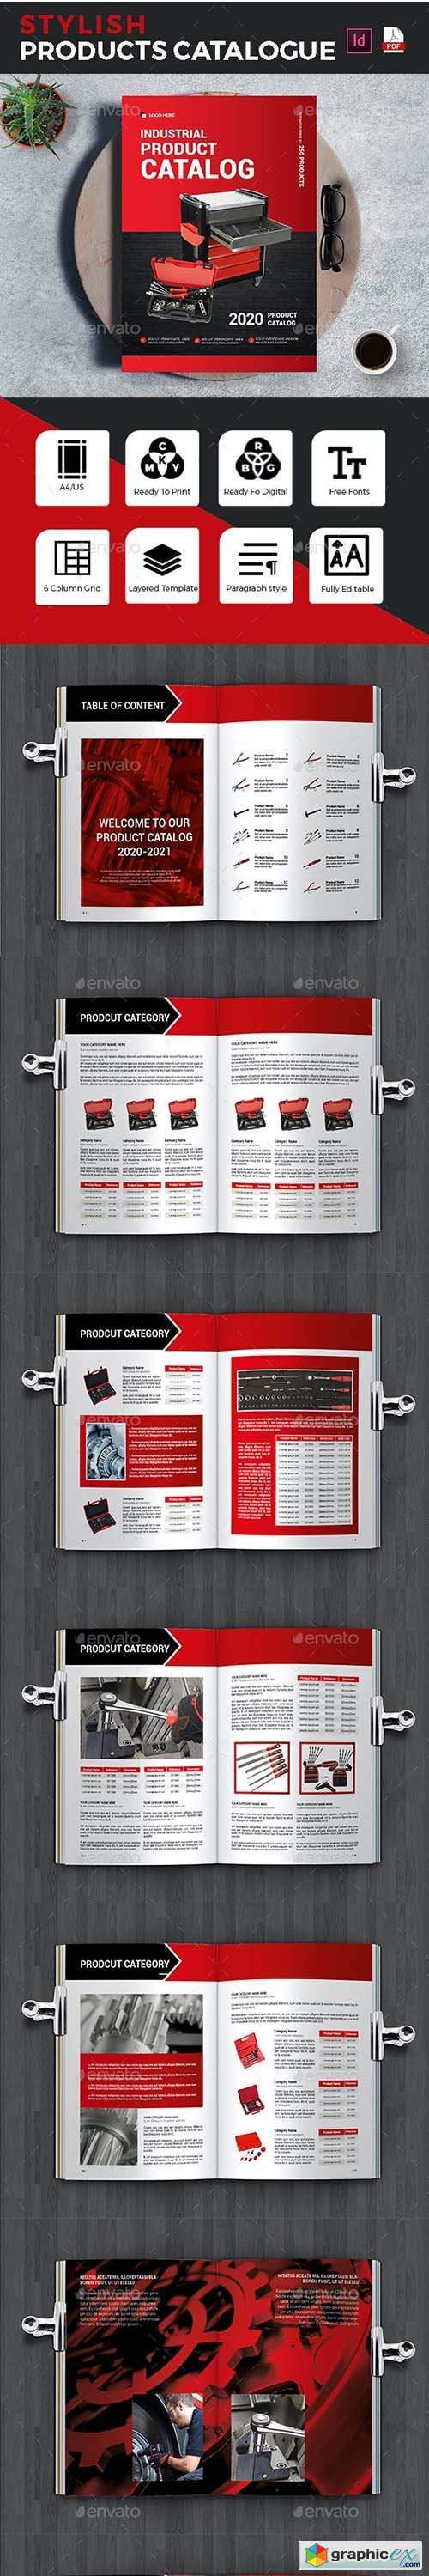 Industrial Products Catalog Template